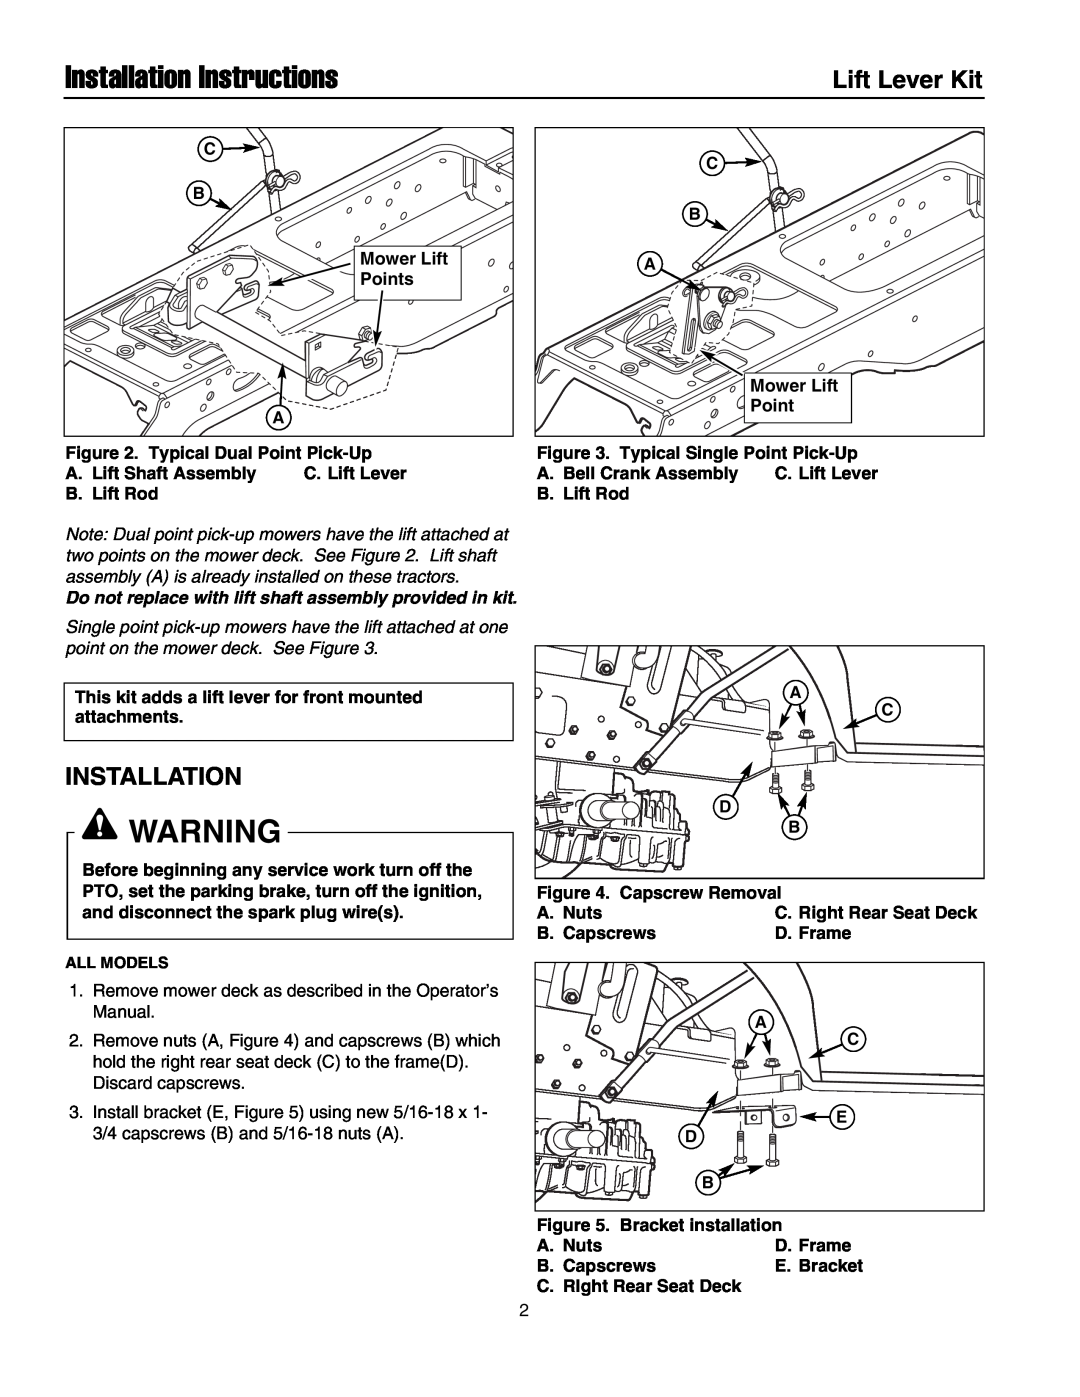 Snapper 1694947 Installation Instructions, Lift Lever Kit, Do not replace with lift shaft assembly provided in kit 